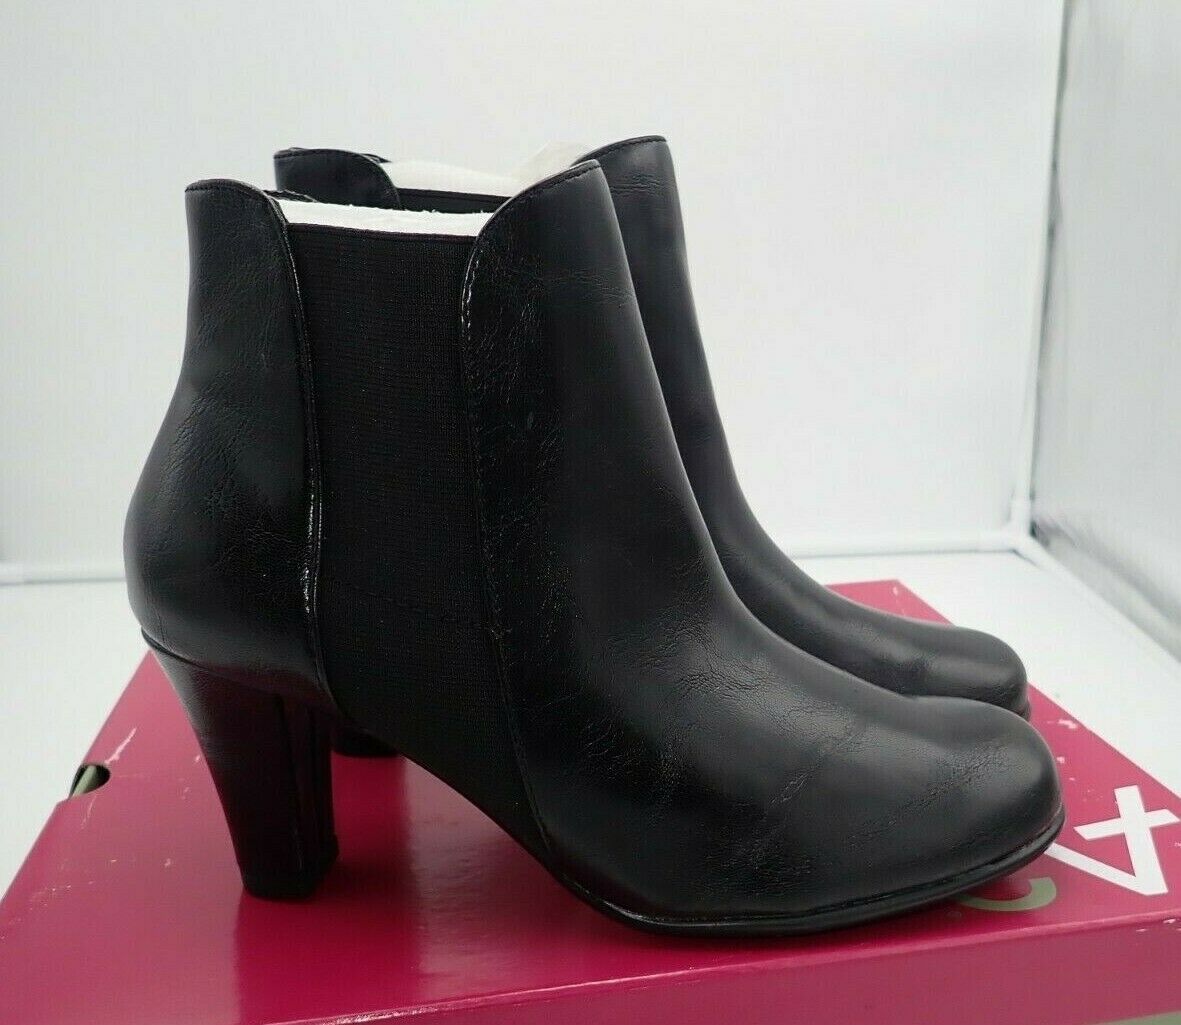 Mismatched boots Right 8.5 left 10 M A2 by Aerosoles Women's Strole ...